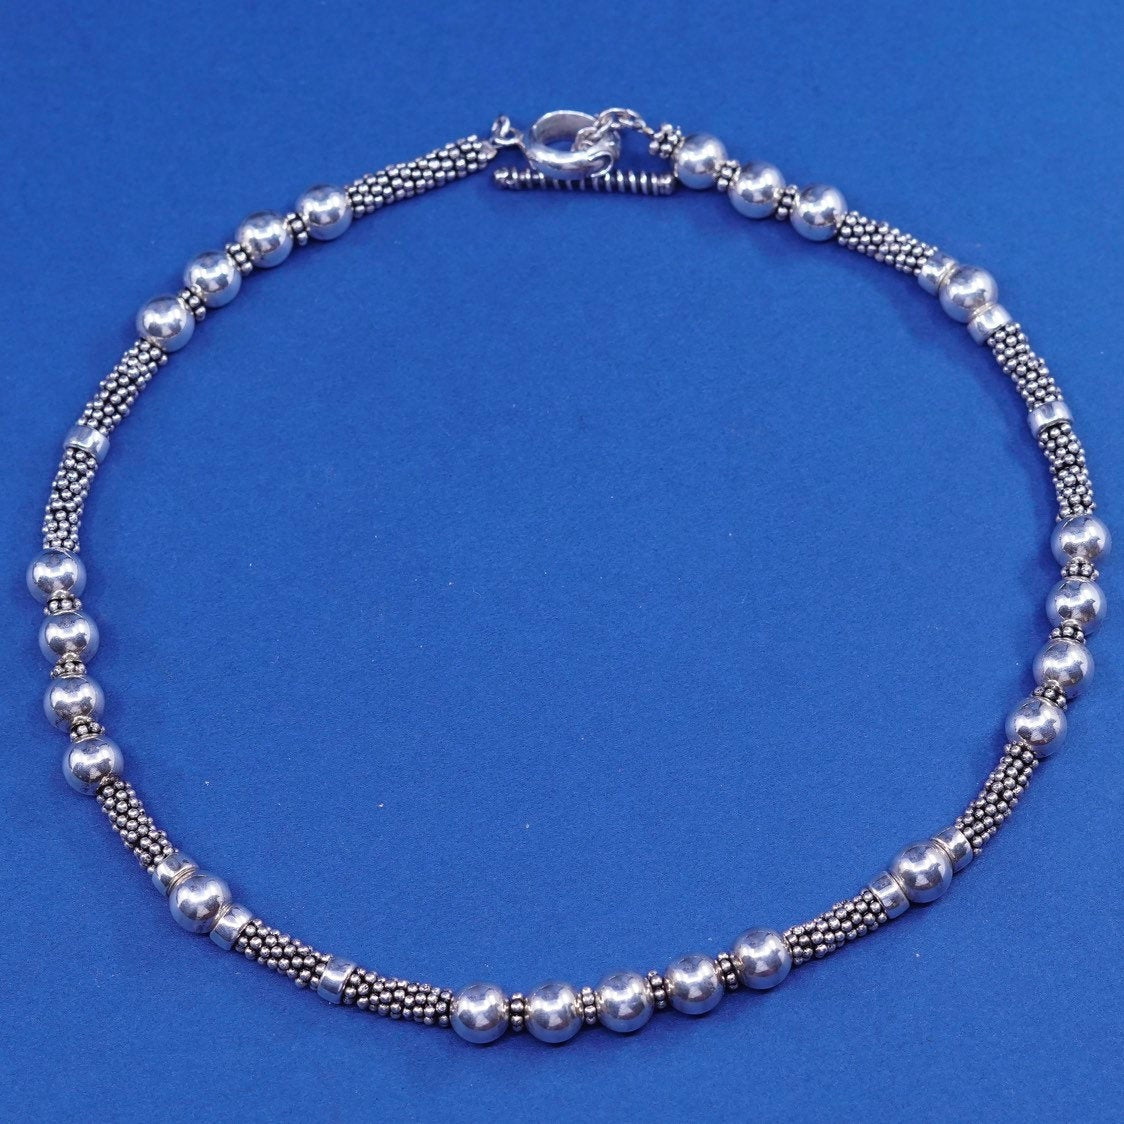 16", 8mm, vtg DAC Sterling silver handmade necklace, 925 beads chain